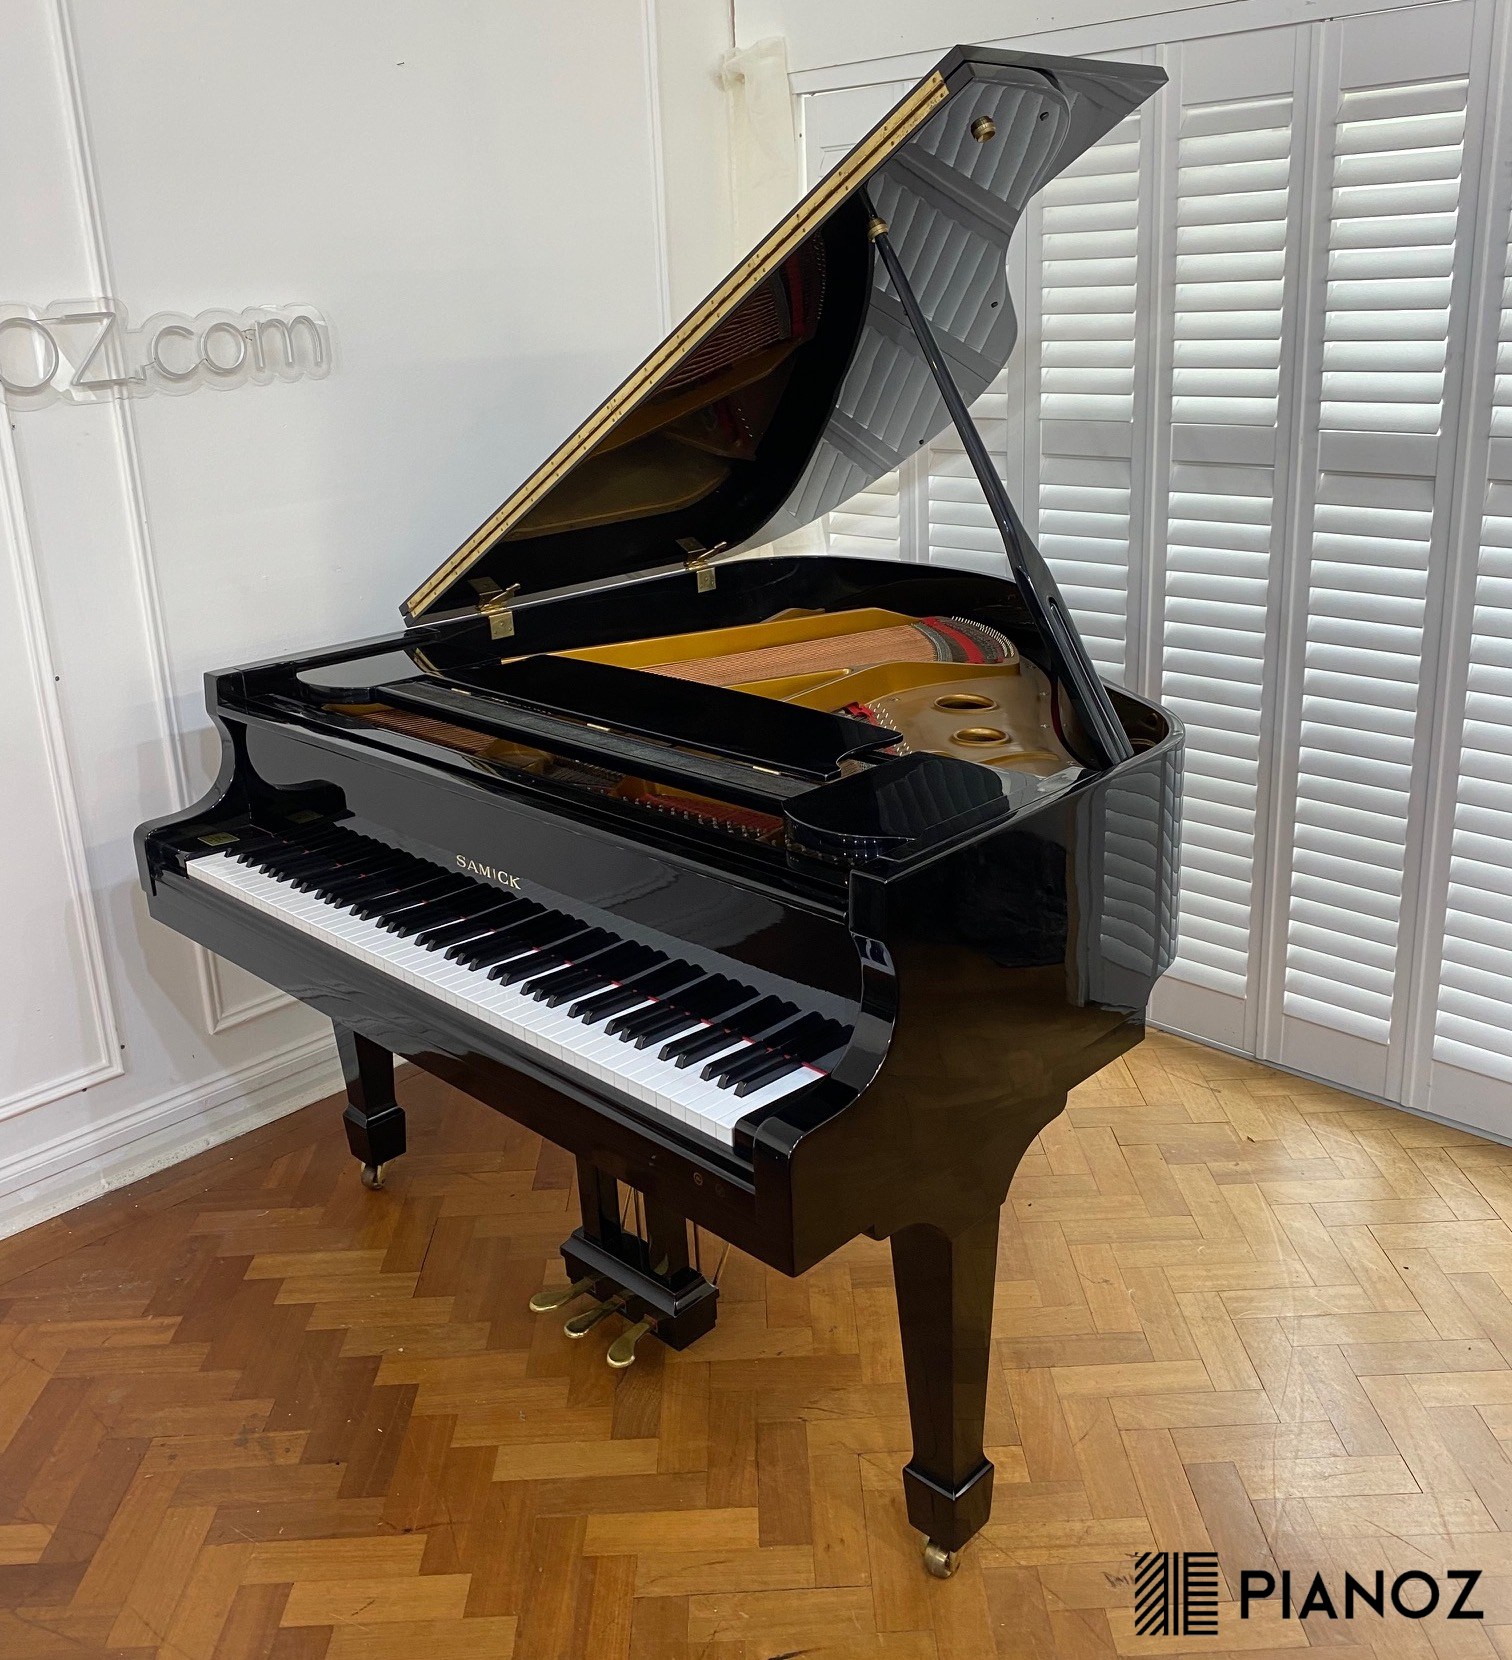 Samick SG155 Baby Grand Piano piano for sale in UK